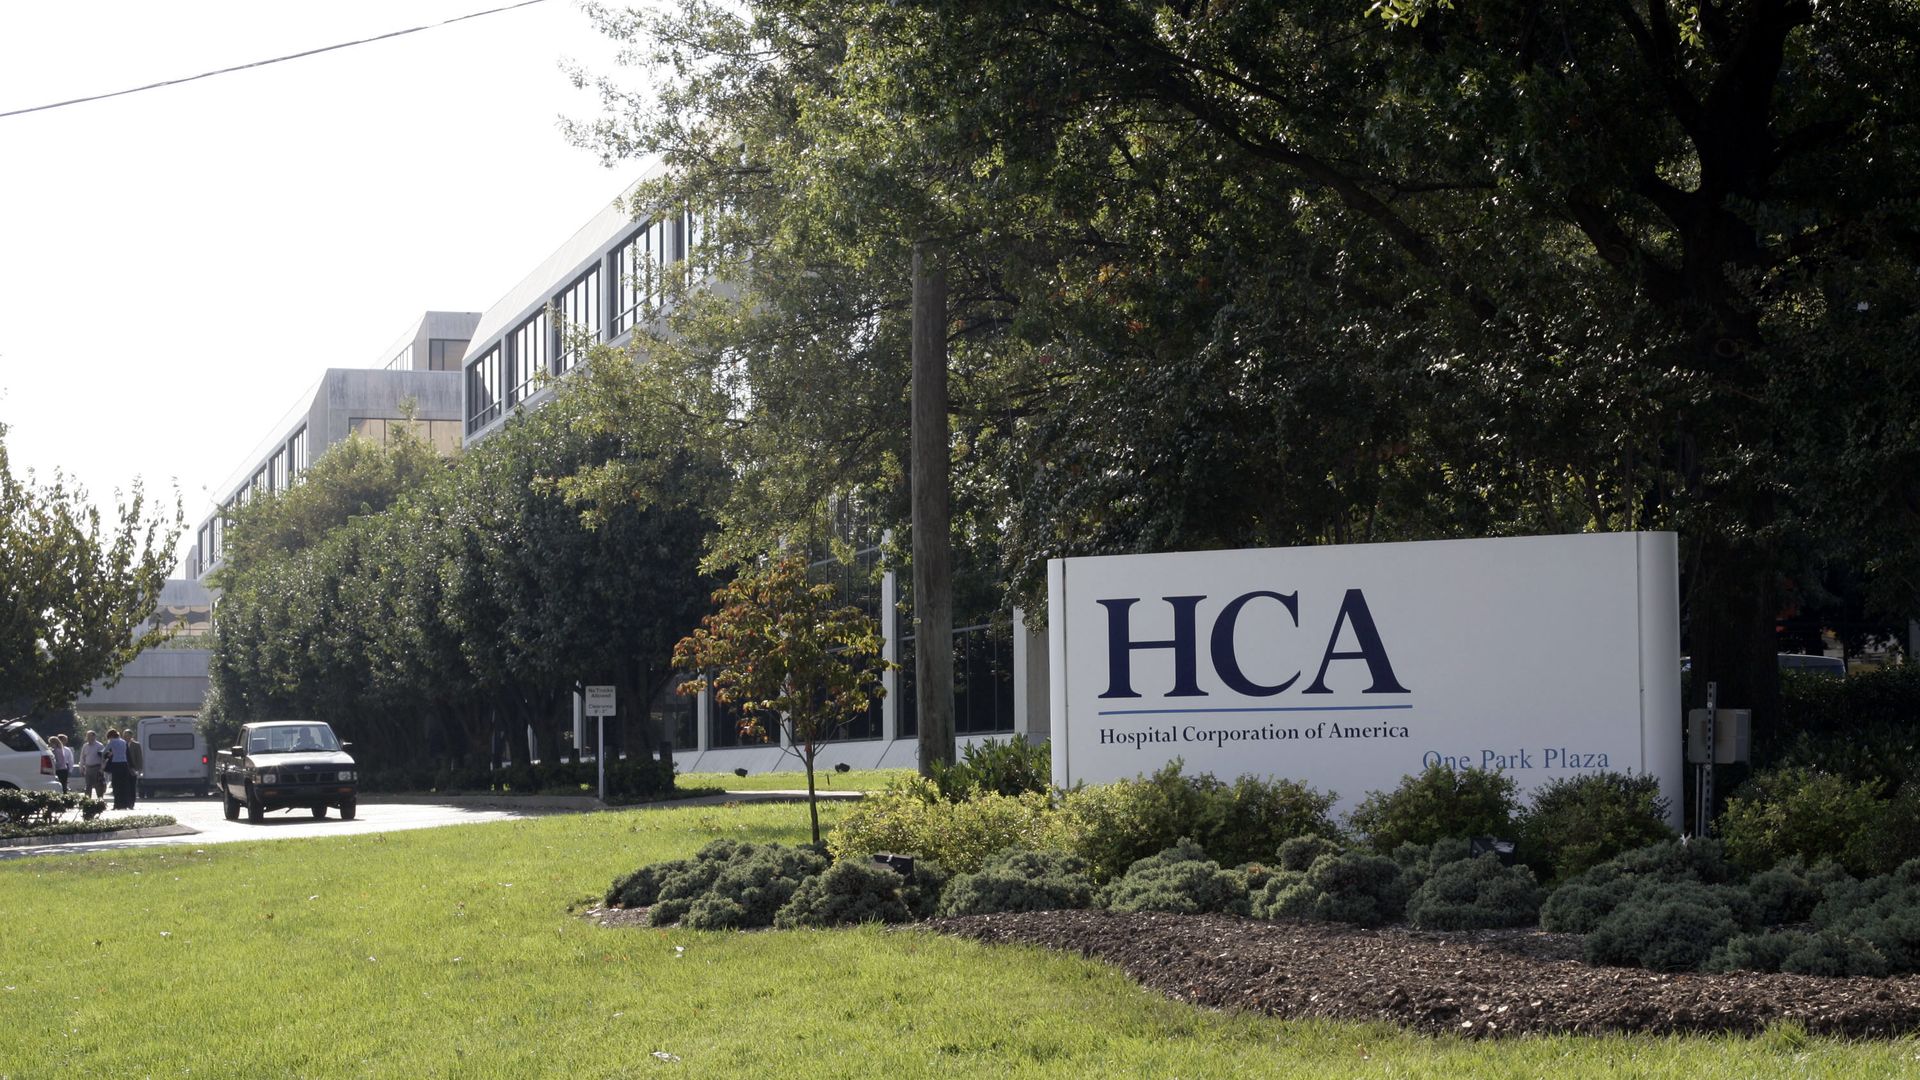 HCA Healthcare sign in front of trees.